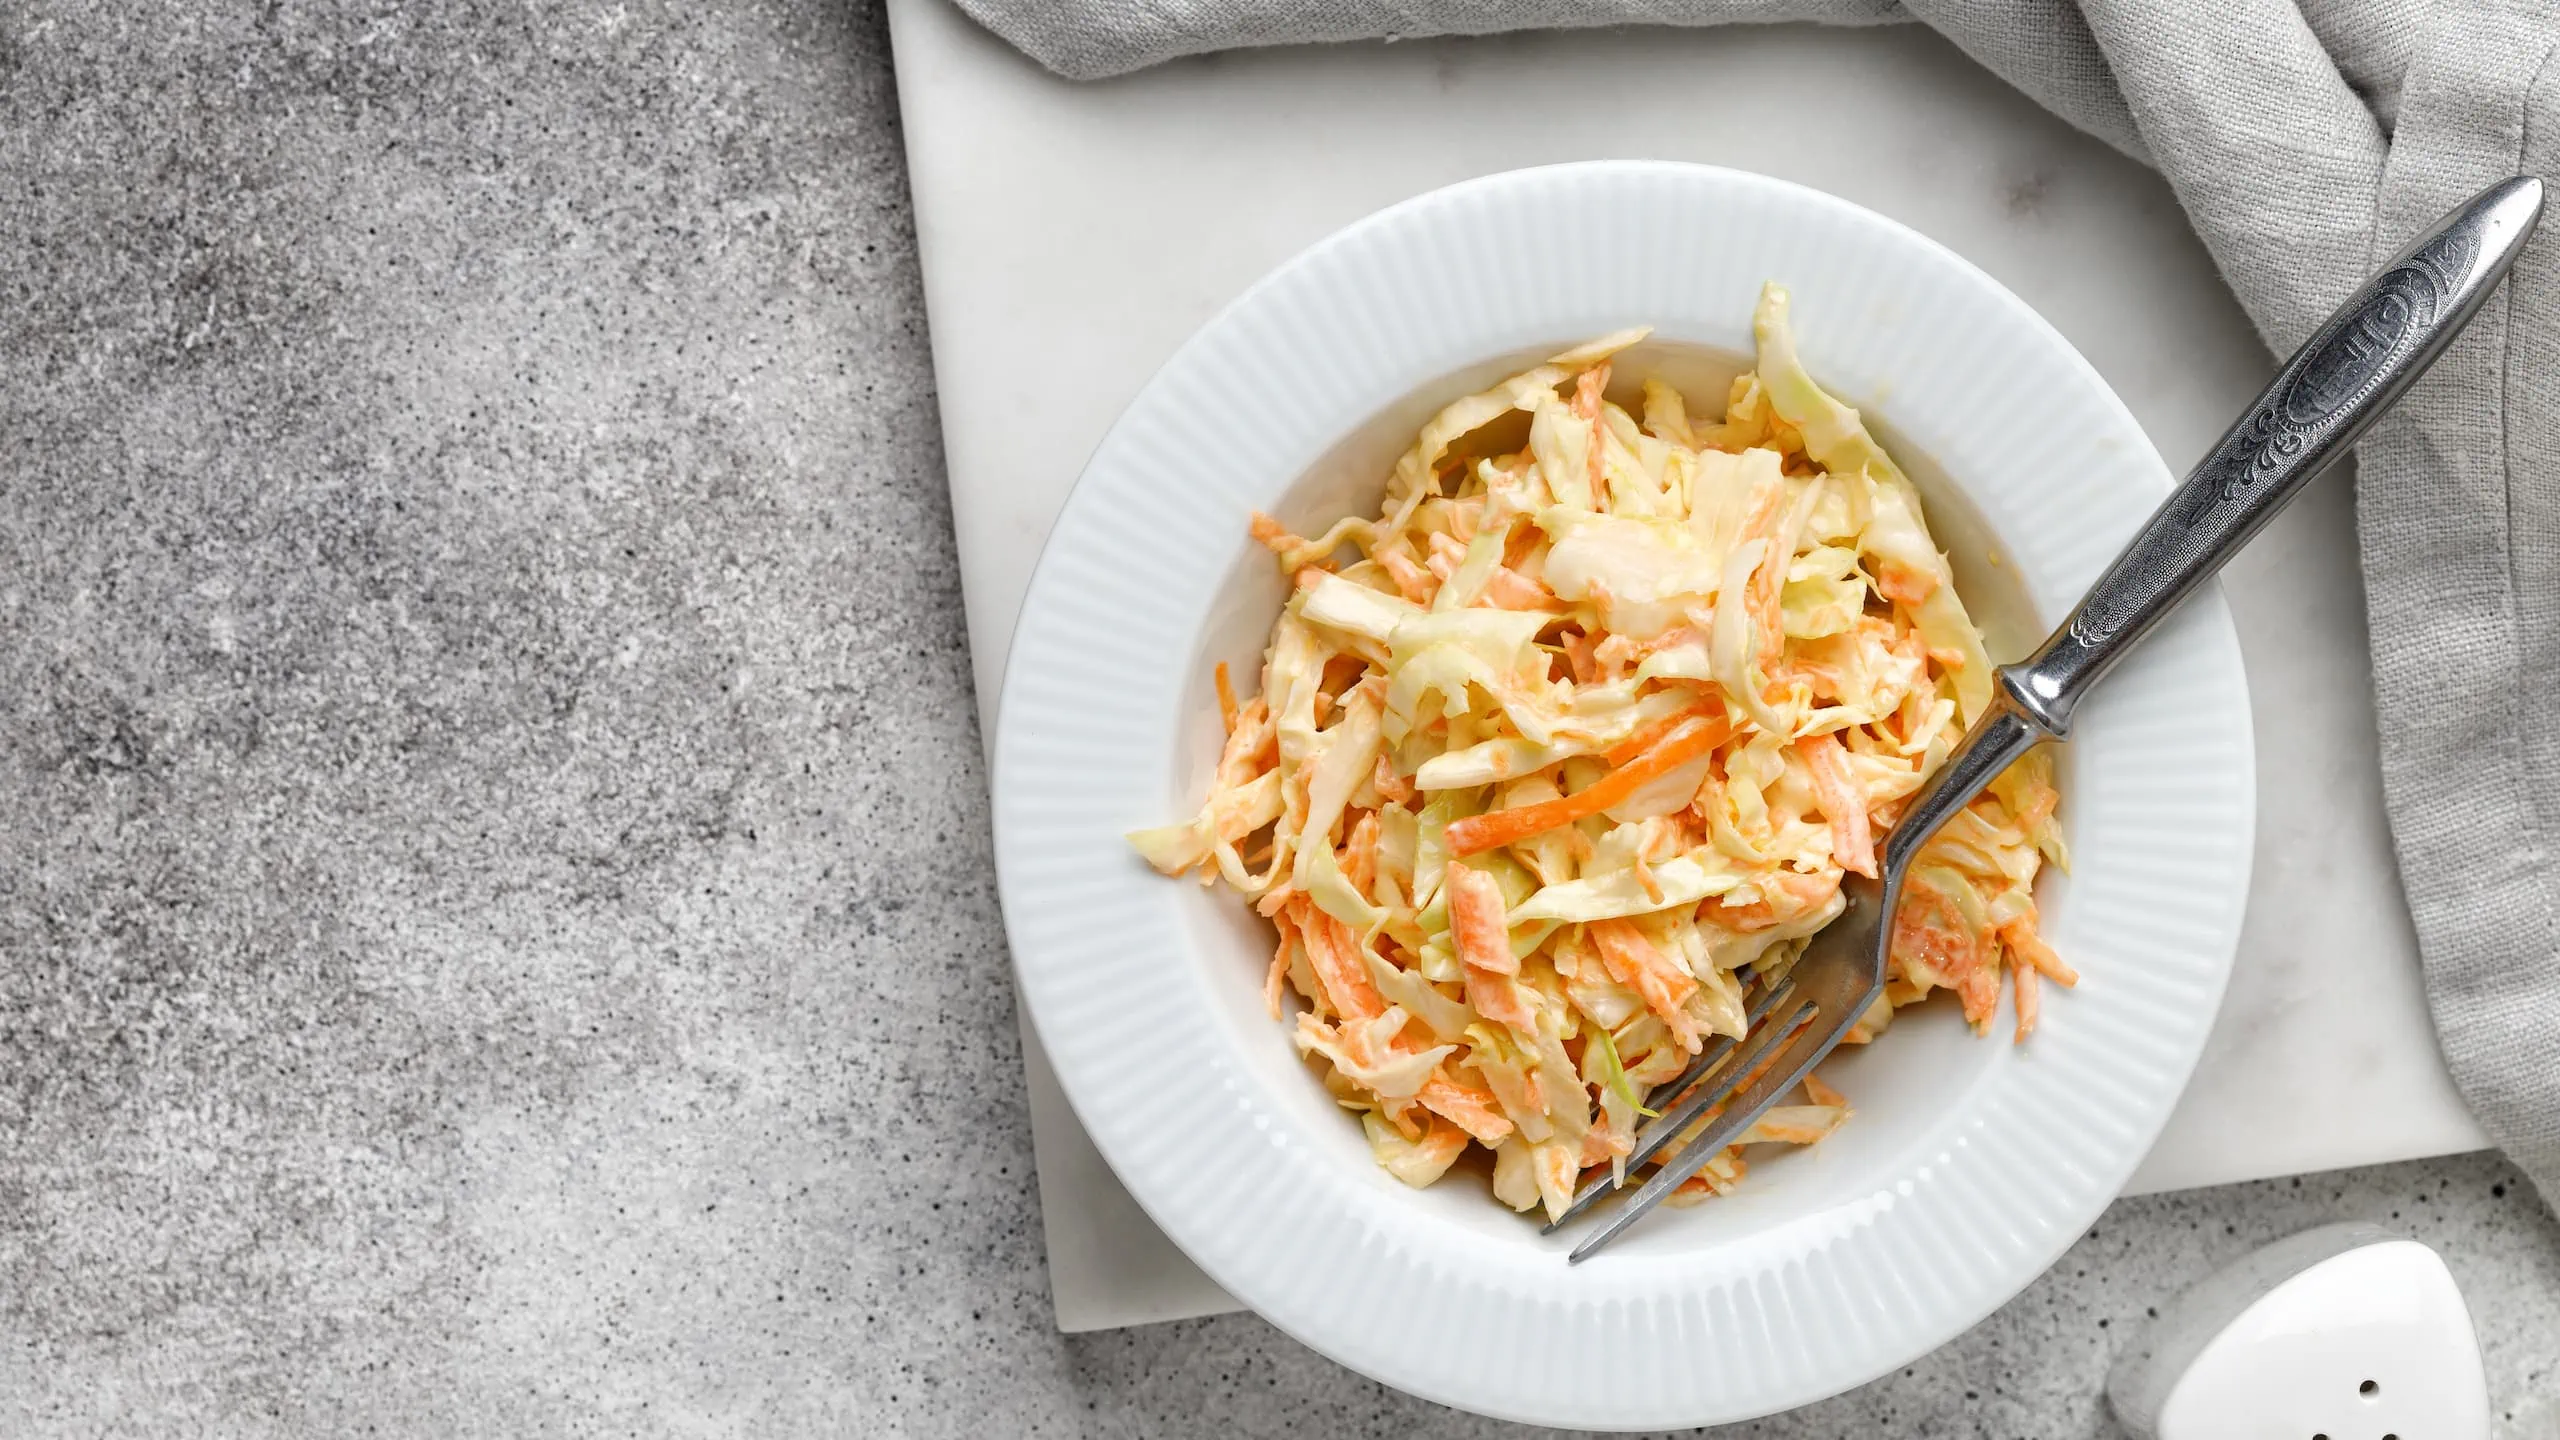 Our version of Long John Silver's coleslaw